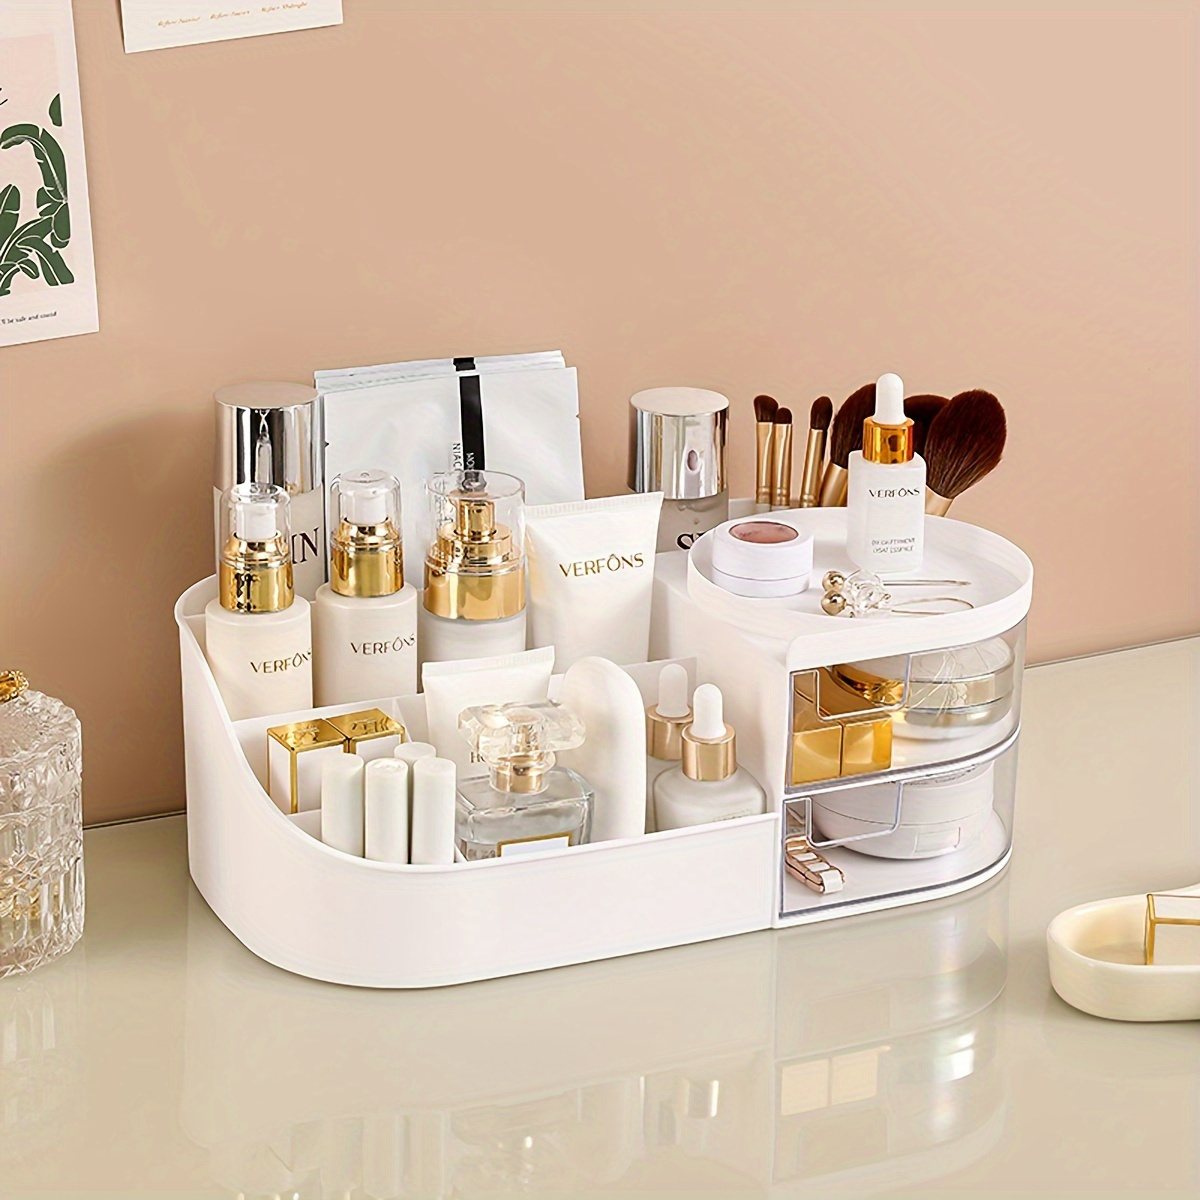 

Modern White Rotating Makeup Organizer With Mirror, Drawer & Lipstick Holder - Plastic Vanity Cosmetic Storage Box For Skincare And Accessories